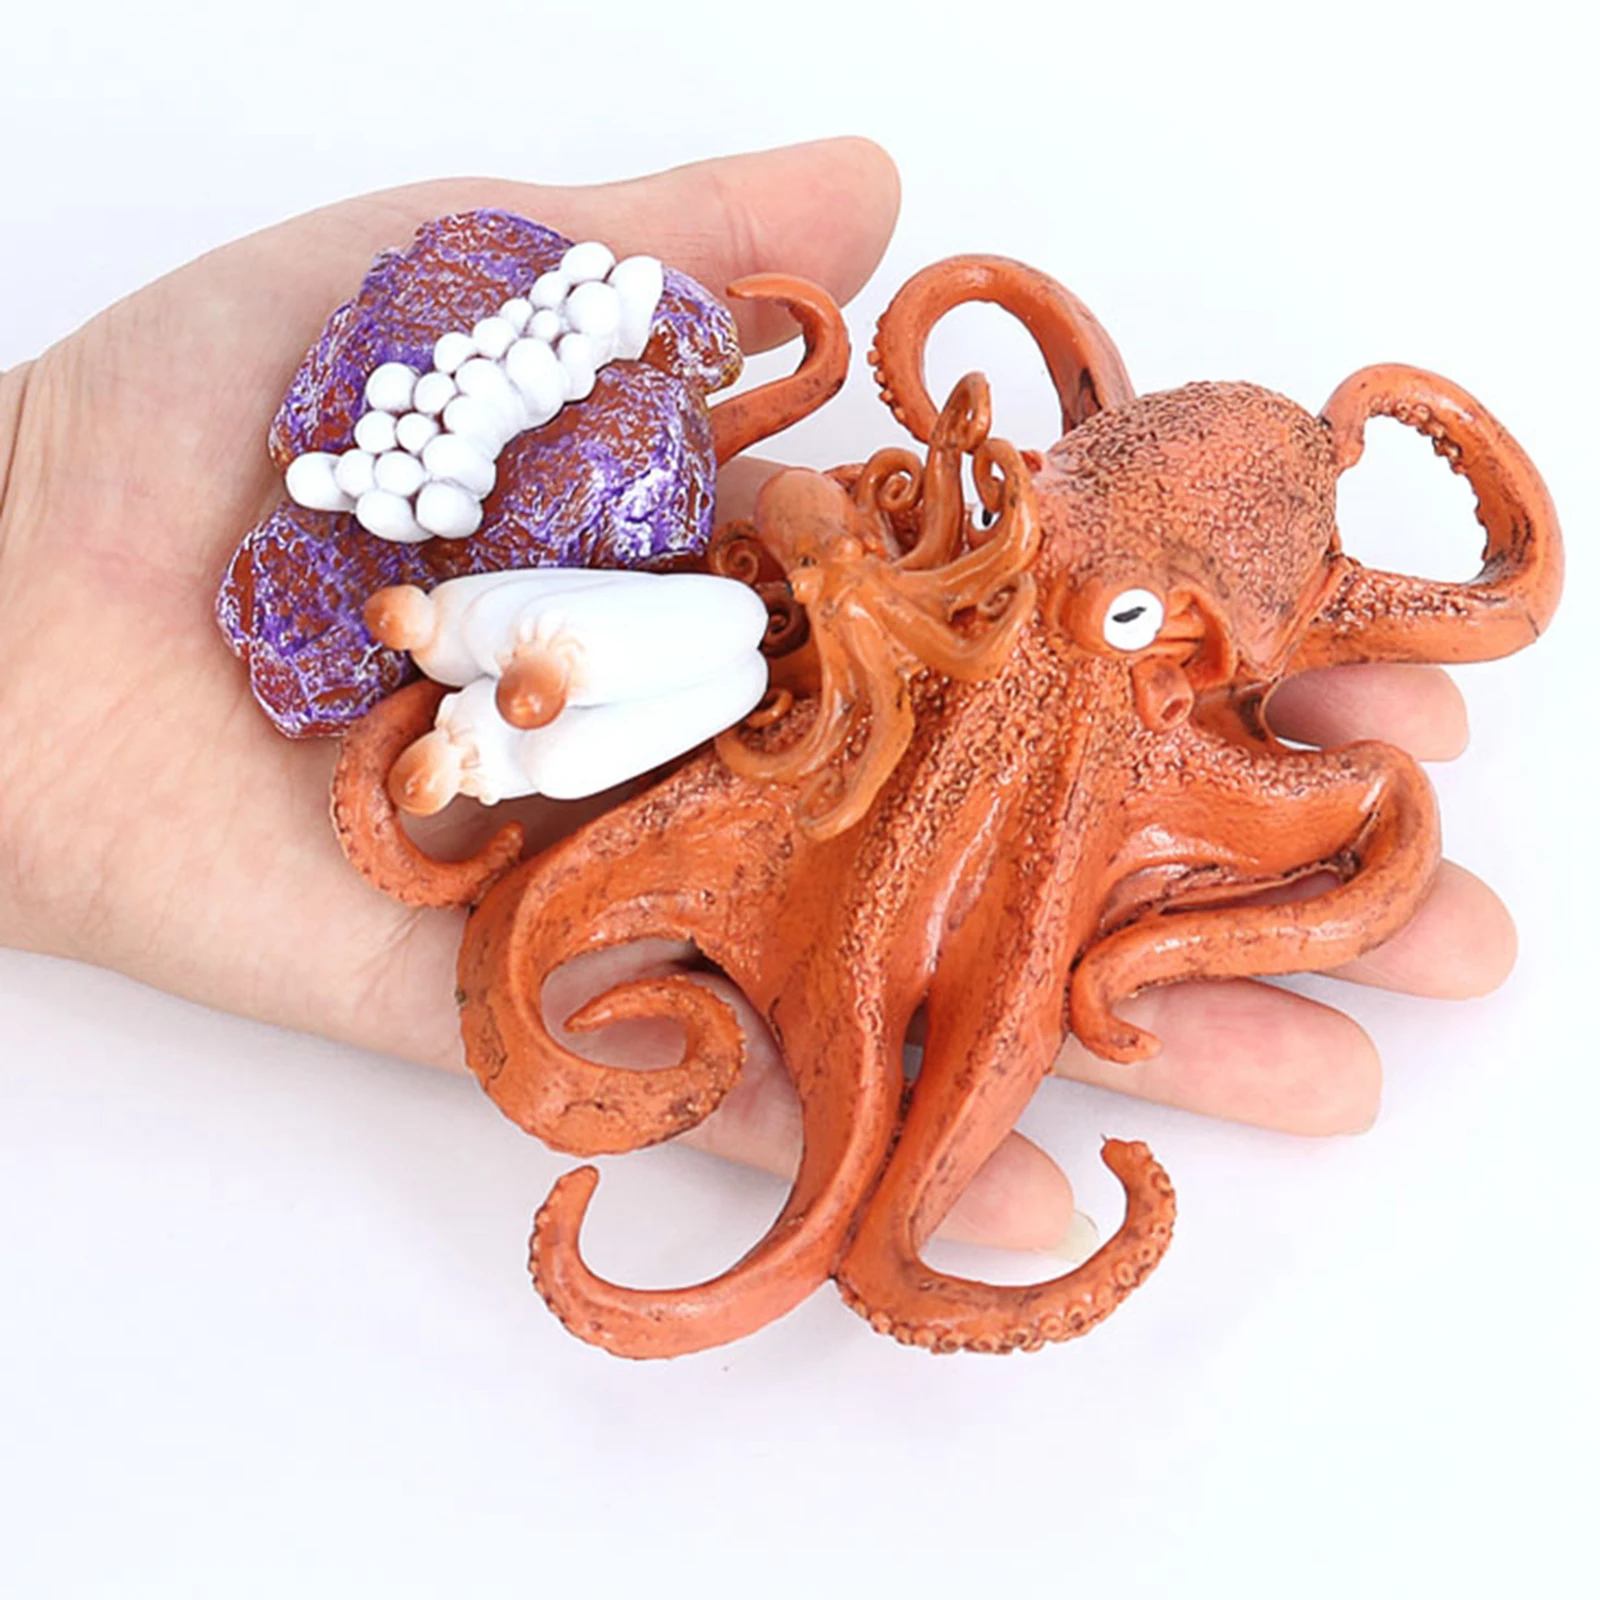 4 Stages Life Cycle of Octopus Nature Insects Life Cycles Growth Model Game Prop Insect Animal Natural Toy